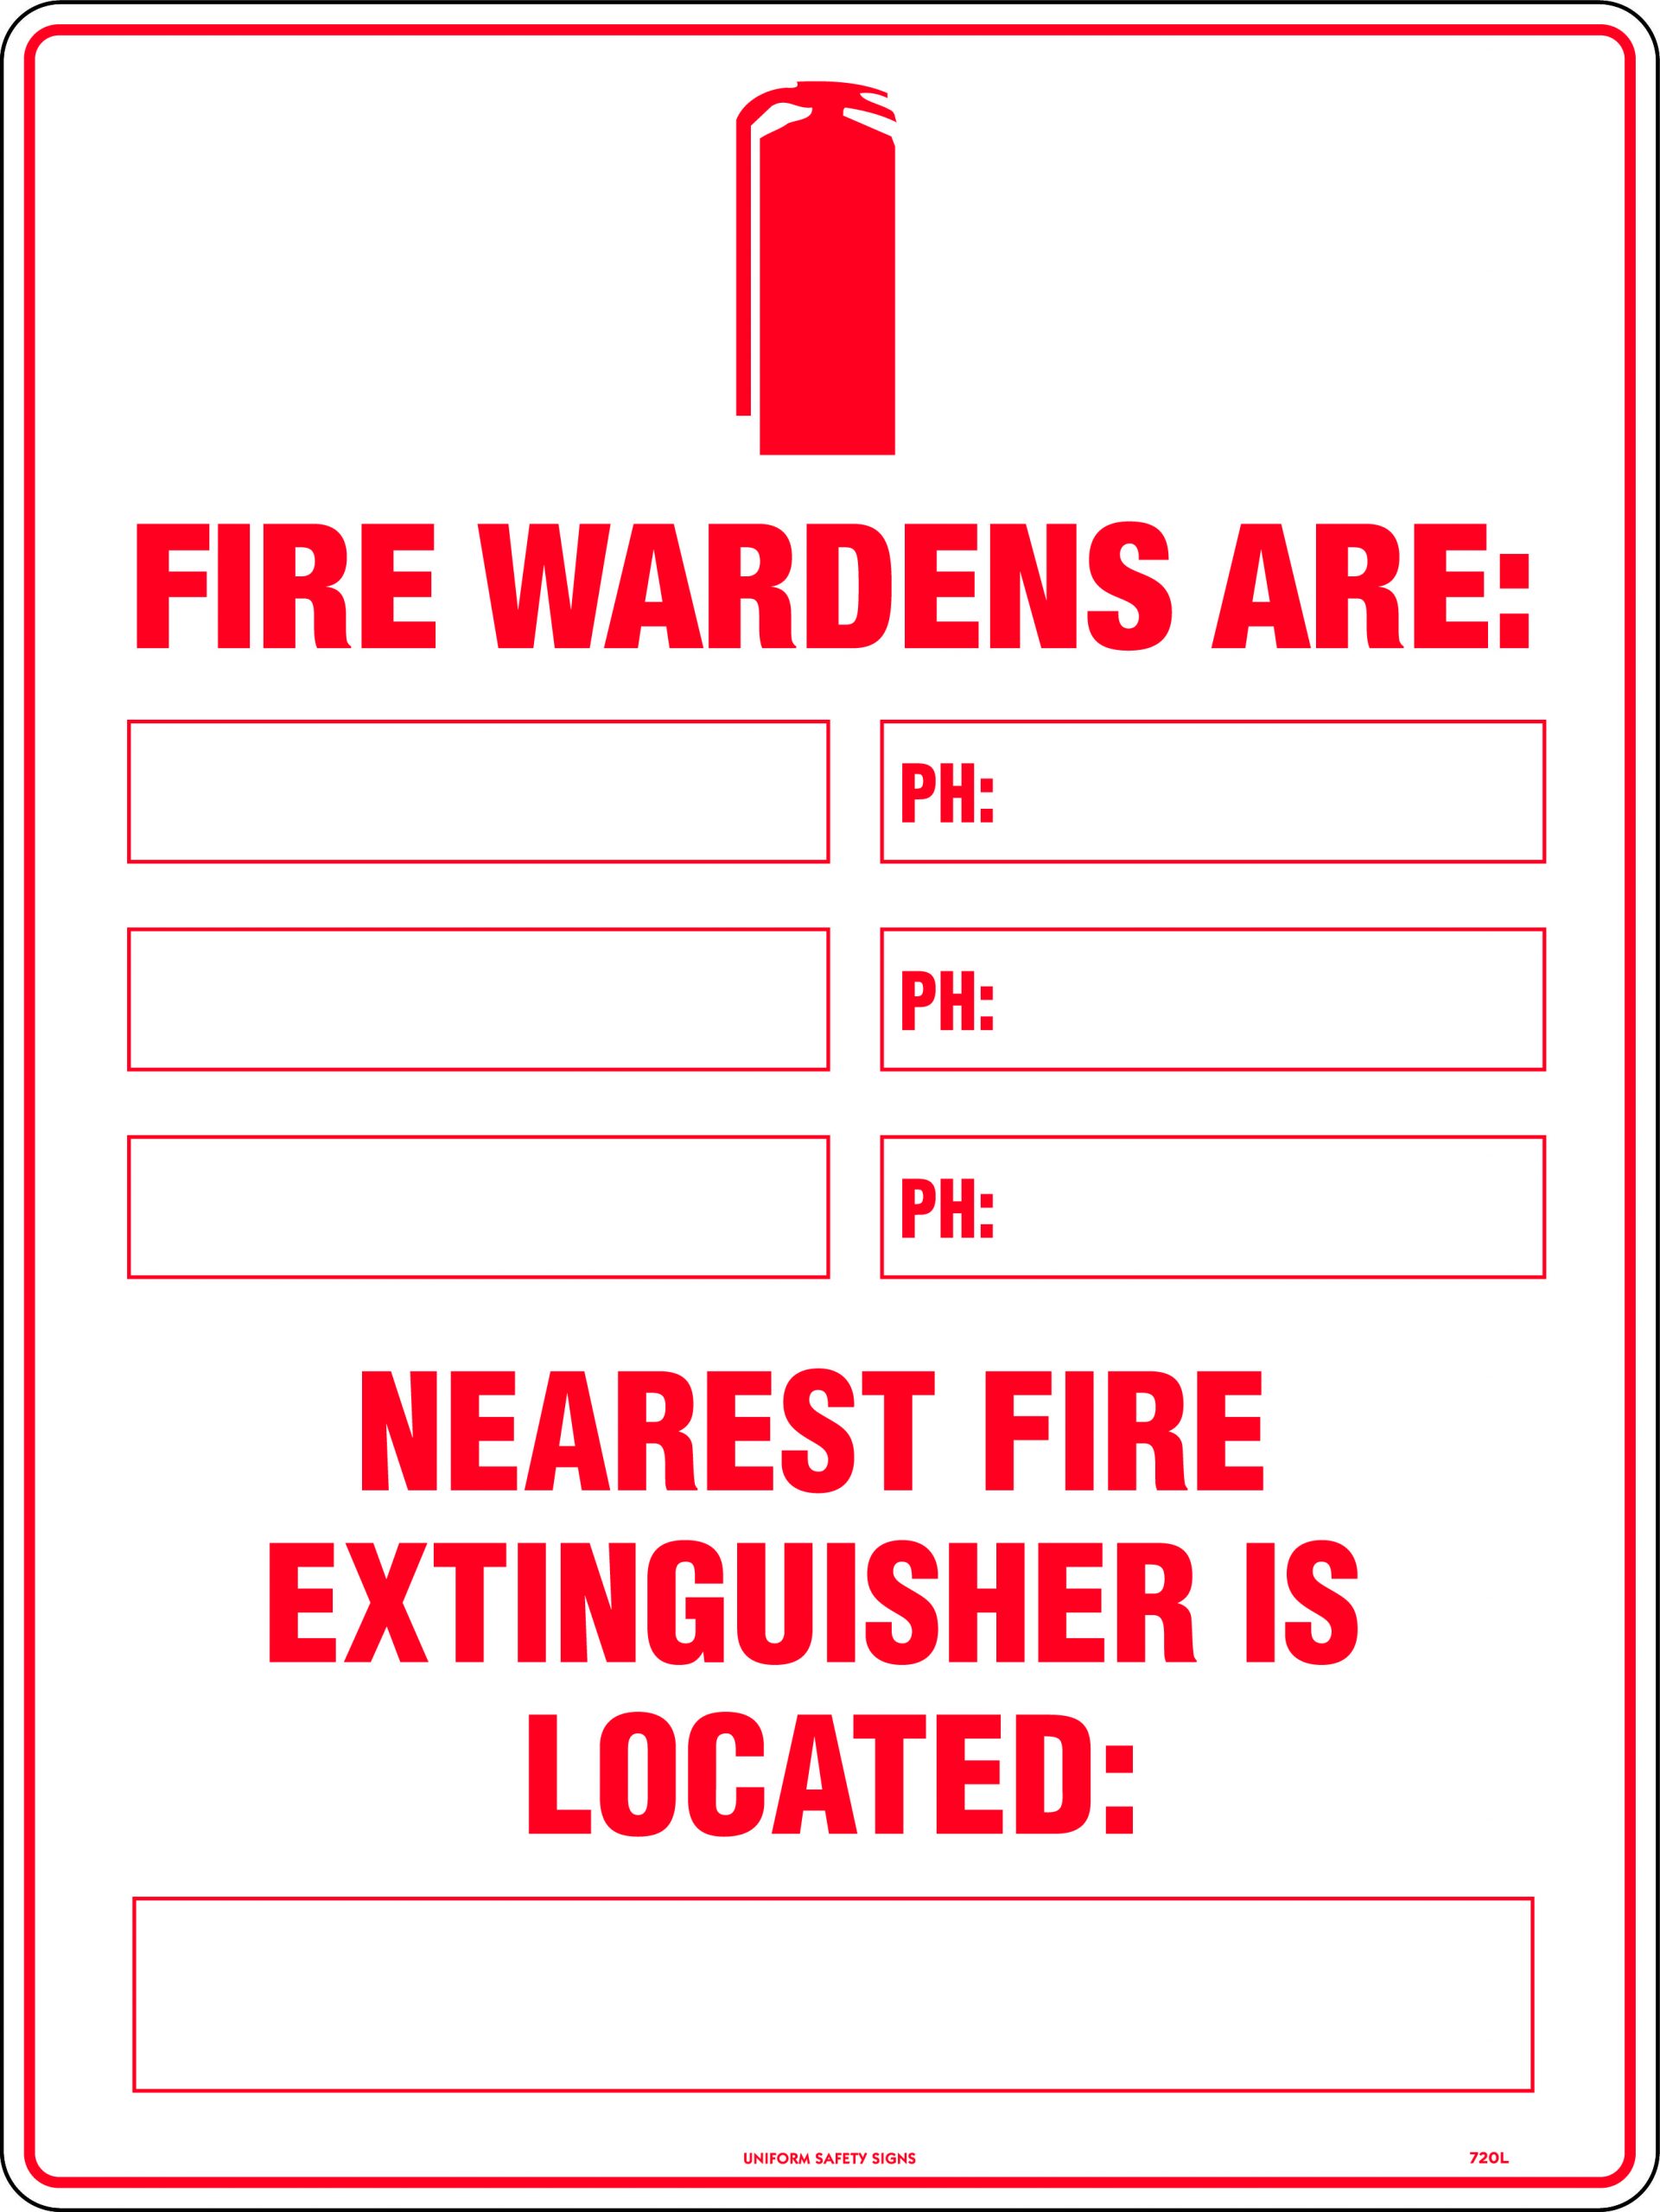 UNIFORM SAFETY 450X300MM METAL FIRE MARSHALLS ARE: NEAREST FIRE EXTING